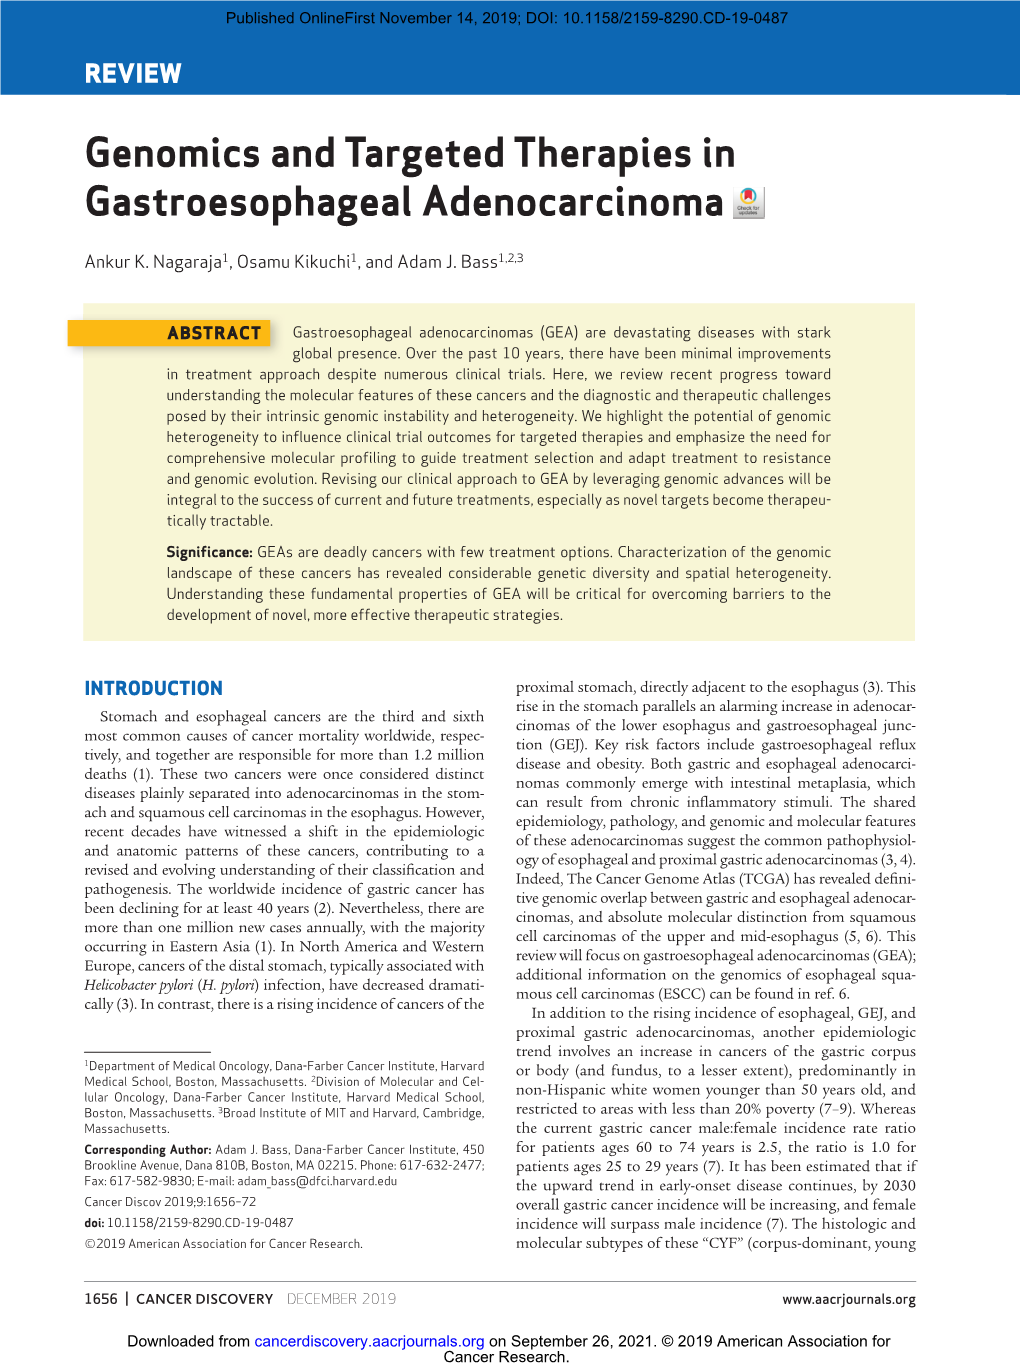 Genomics and Targeted Therapies in Gastroesophageal Adenocarcinoma